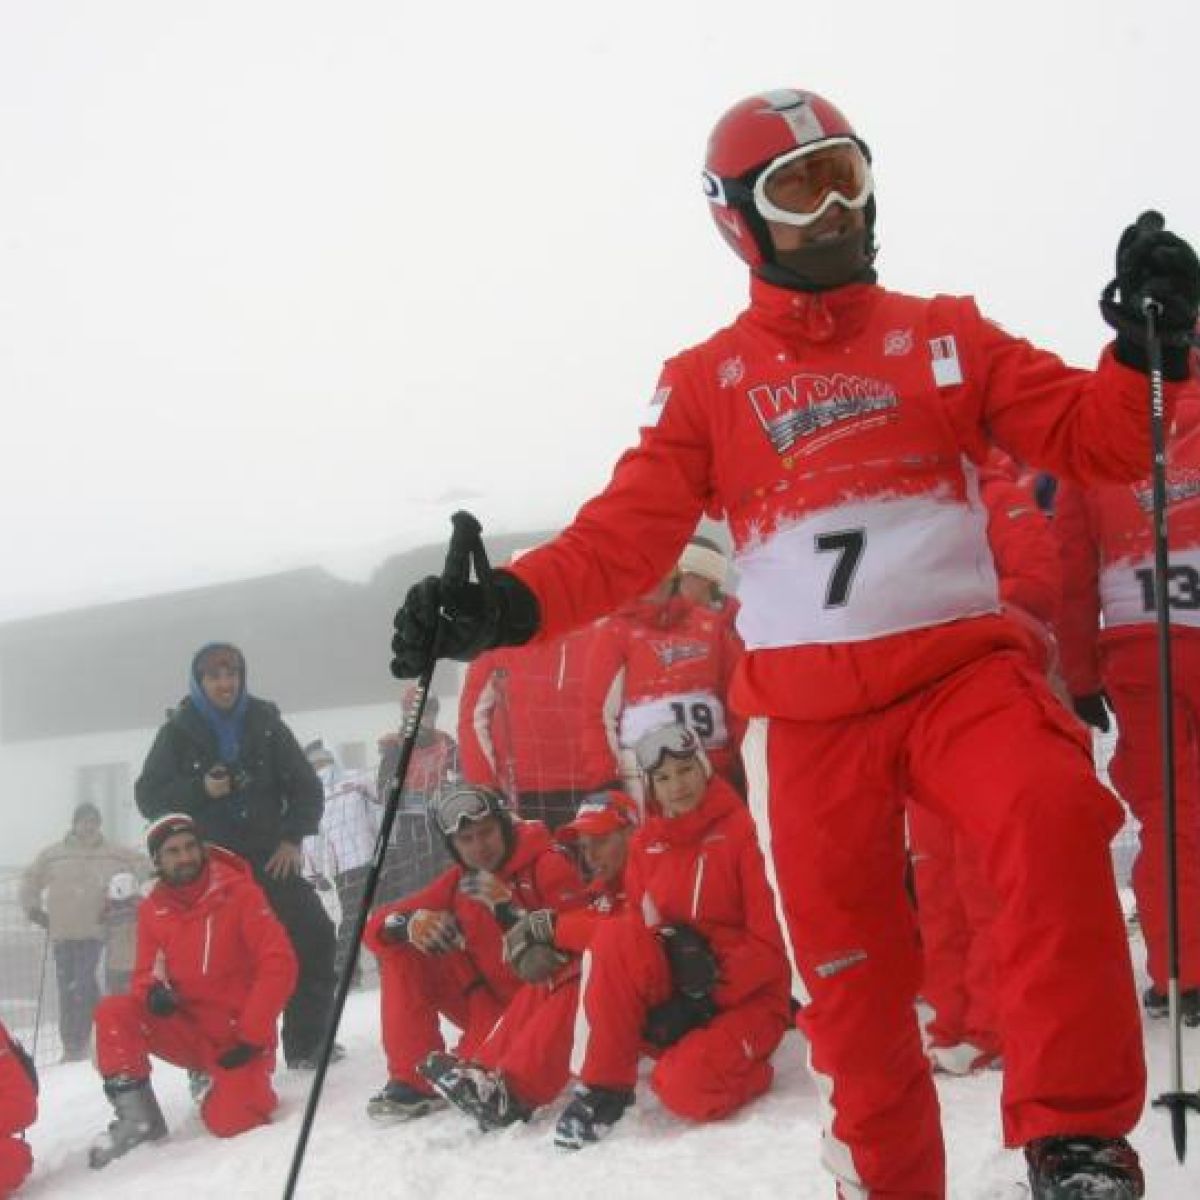 What Are Conditions Like In Meribel The Scene Of Schumi S Accident